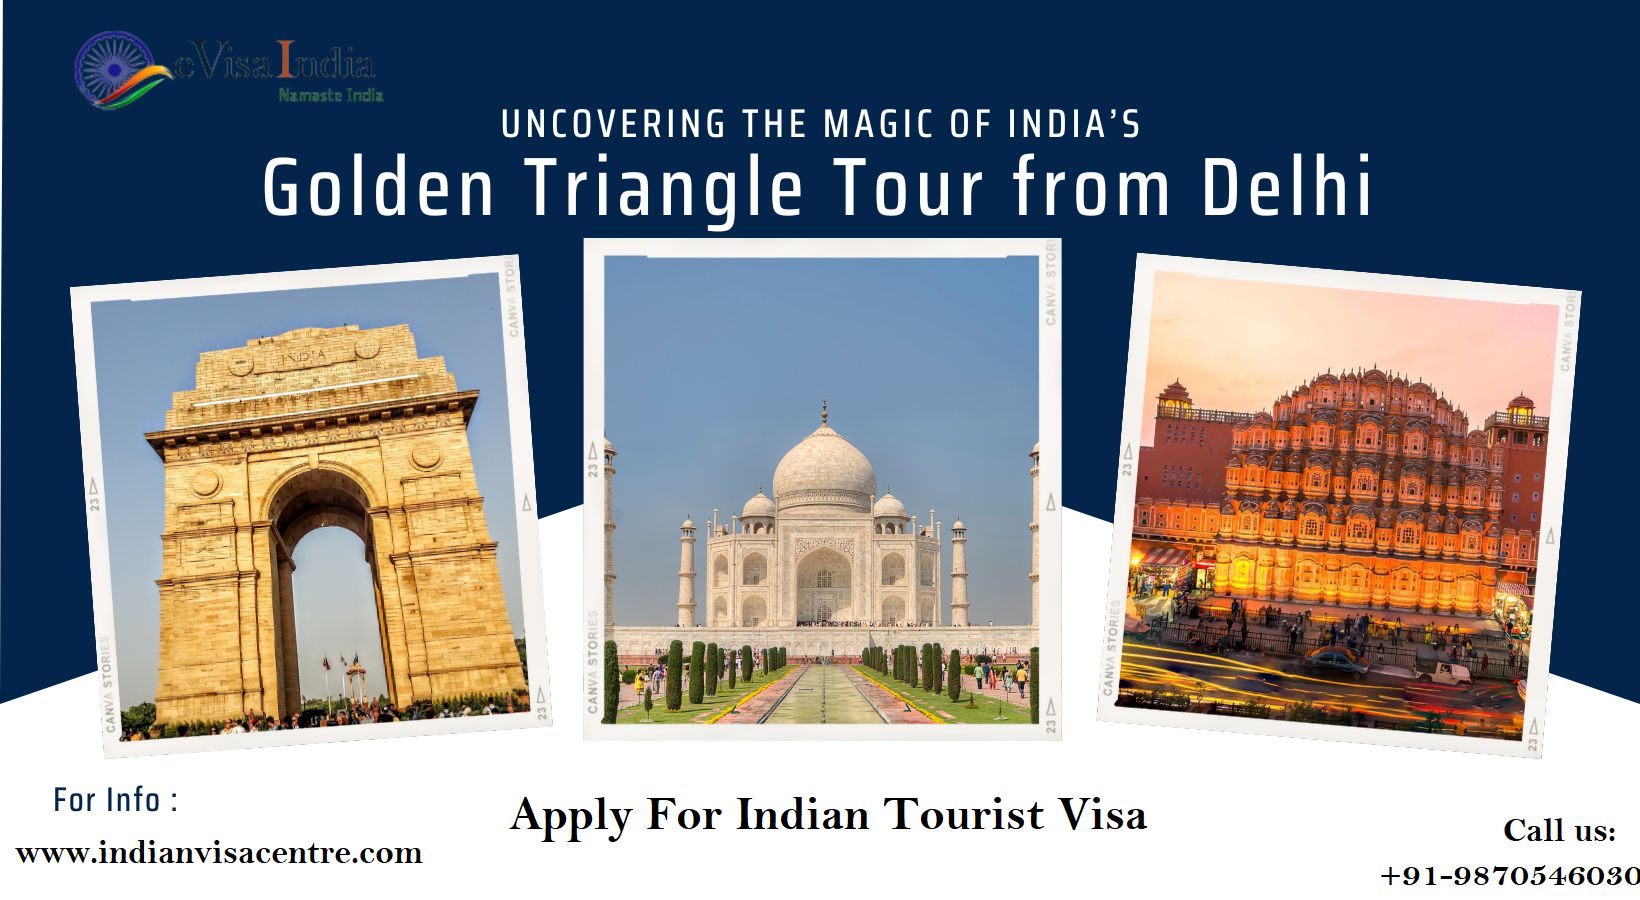  How to Visit the Golden Triangle in India with an Indian Visa Online